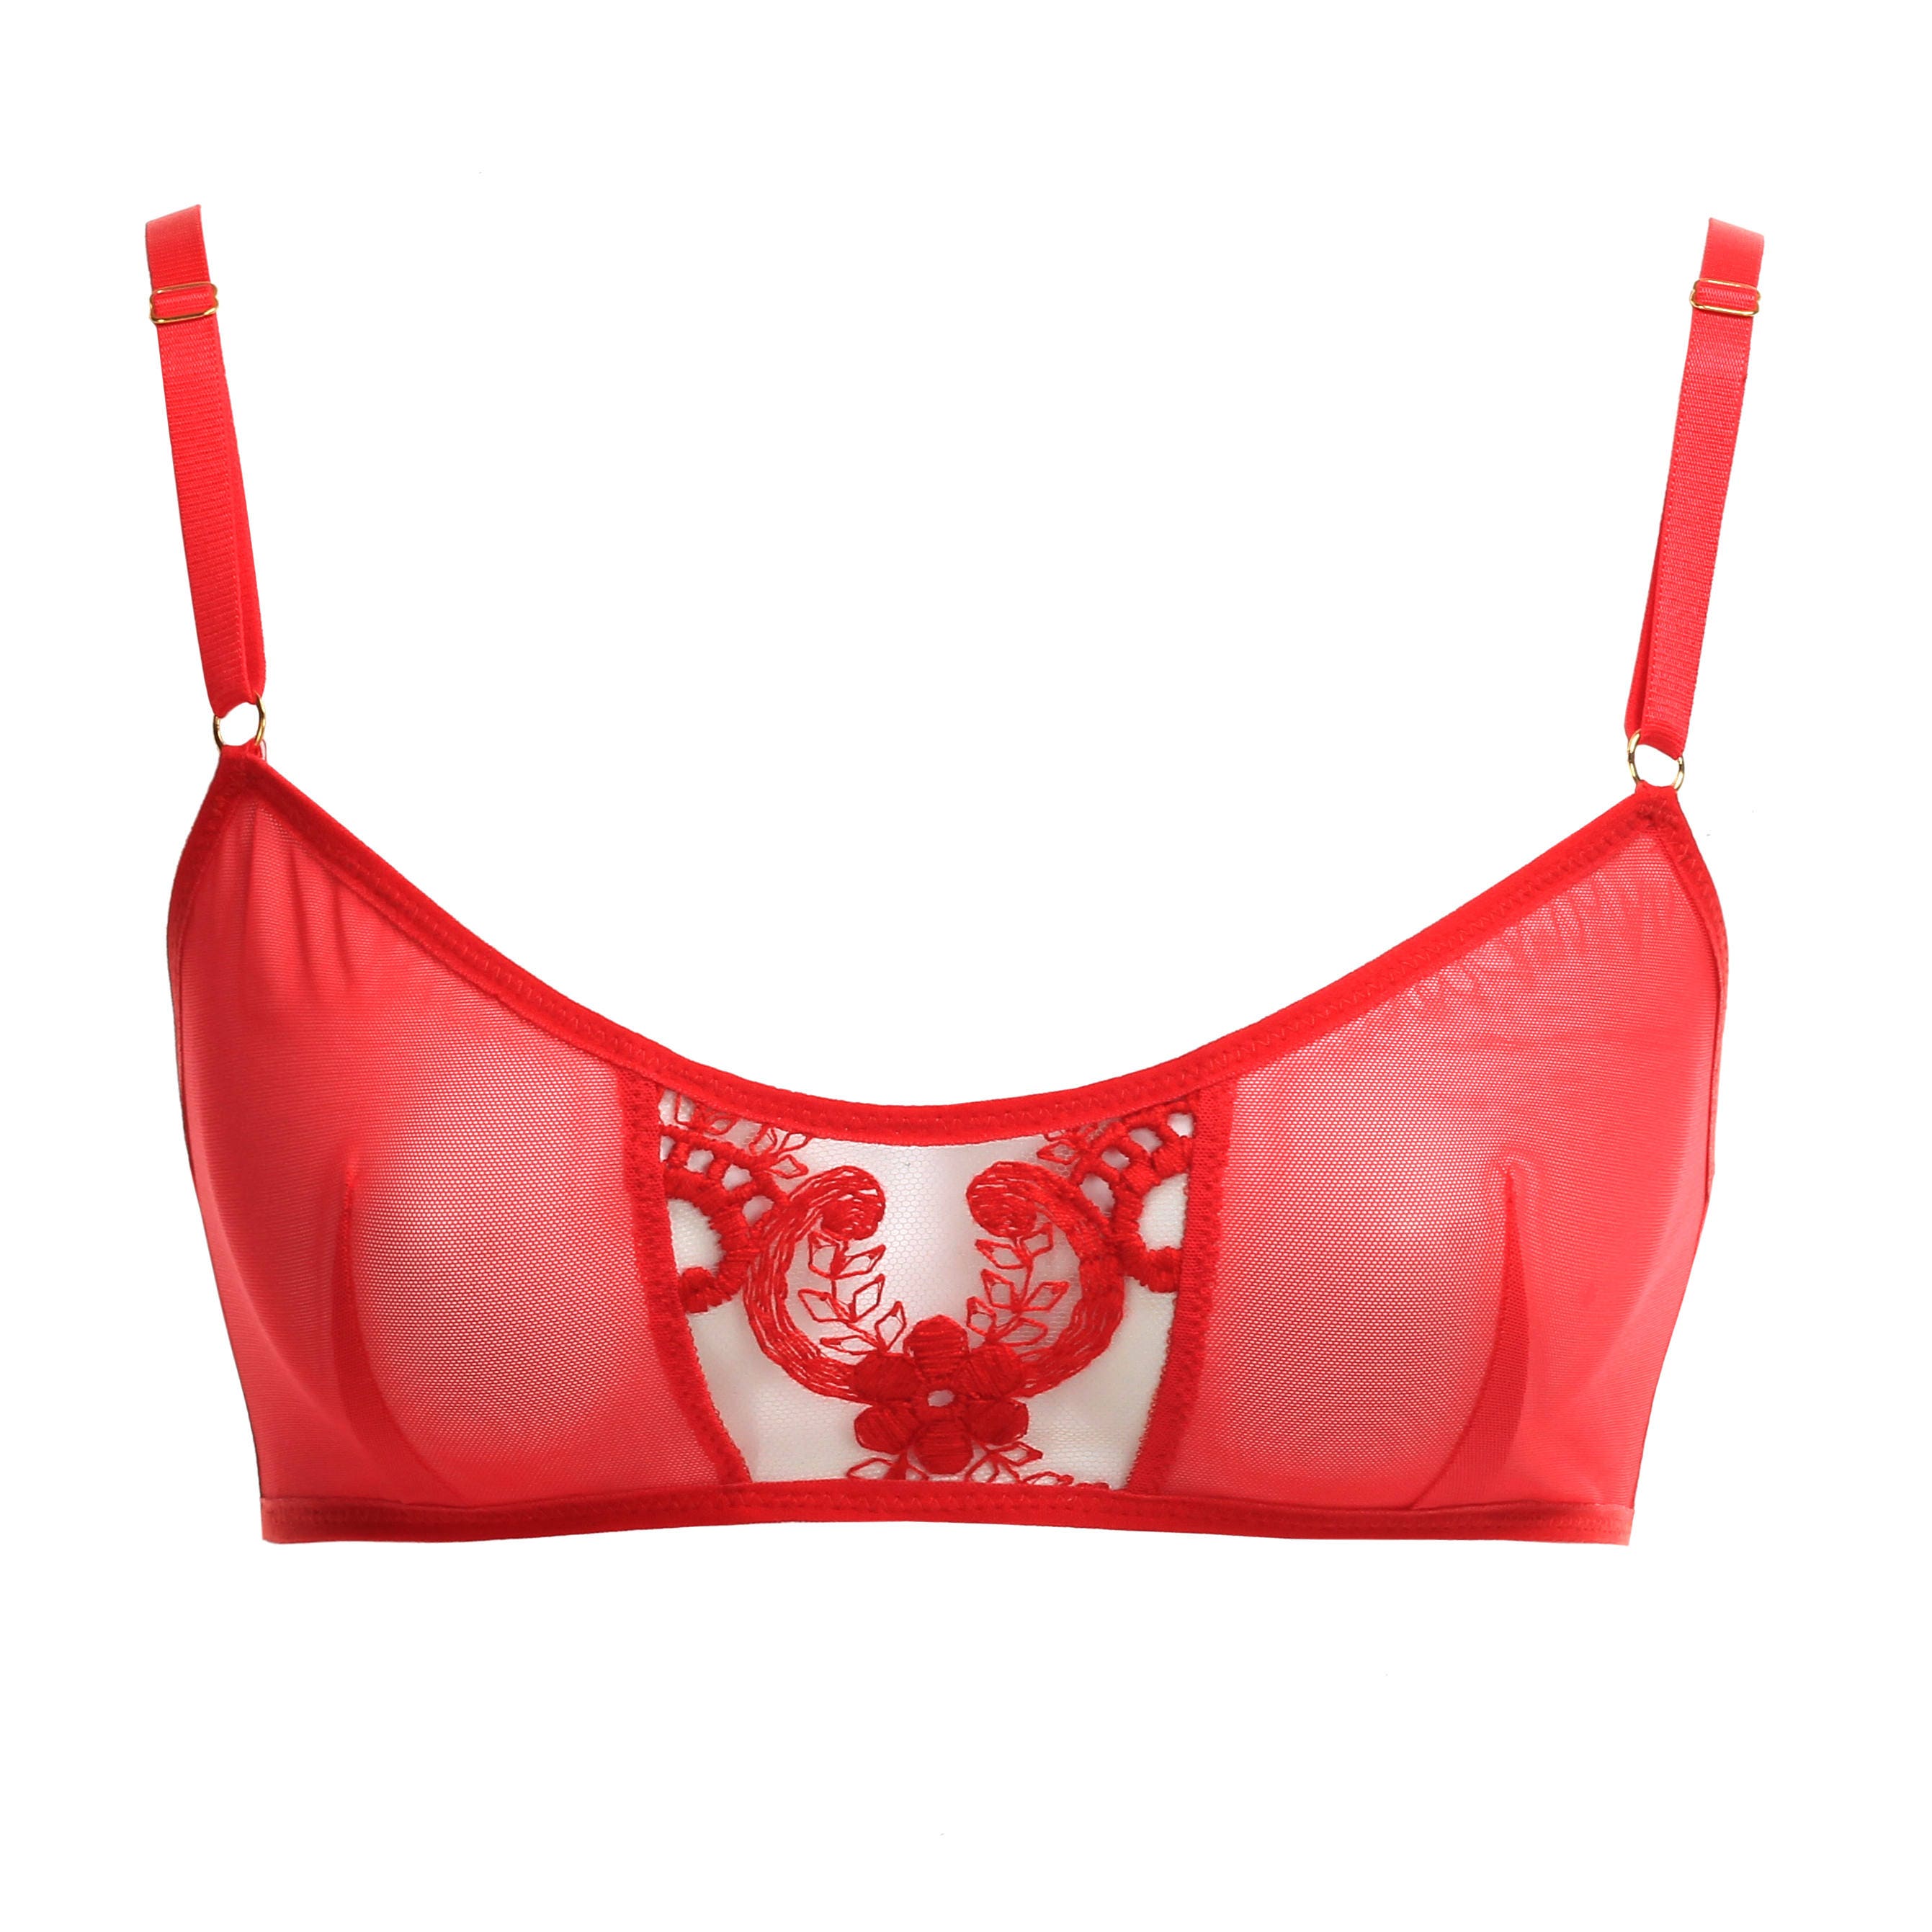 Red Mesh Bralette With Lace and Golden Details Sexy Sheer Lingerie